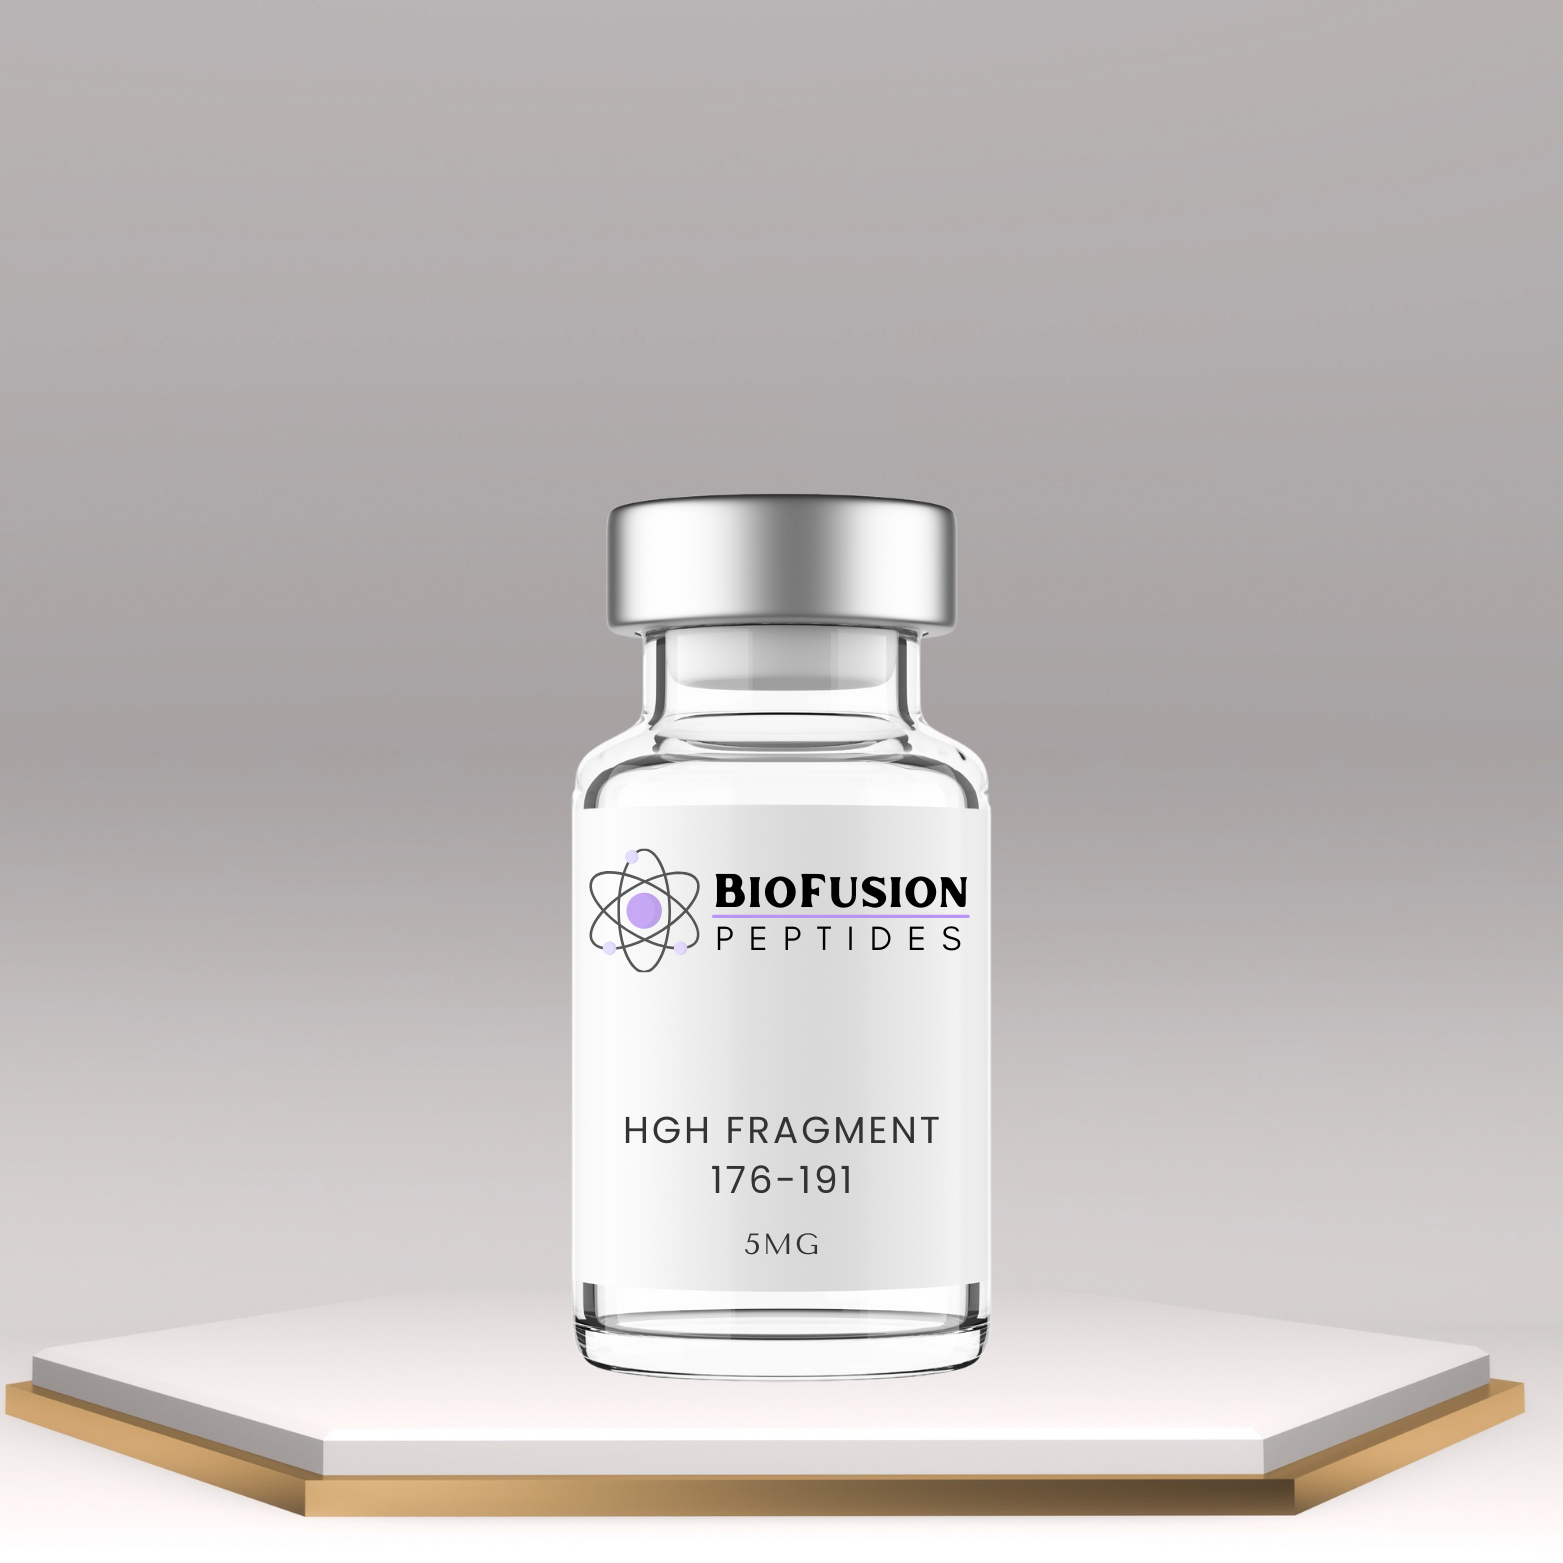 BioFusion Peptides HGH Fragment 176-191 vial